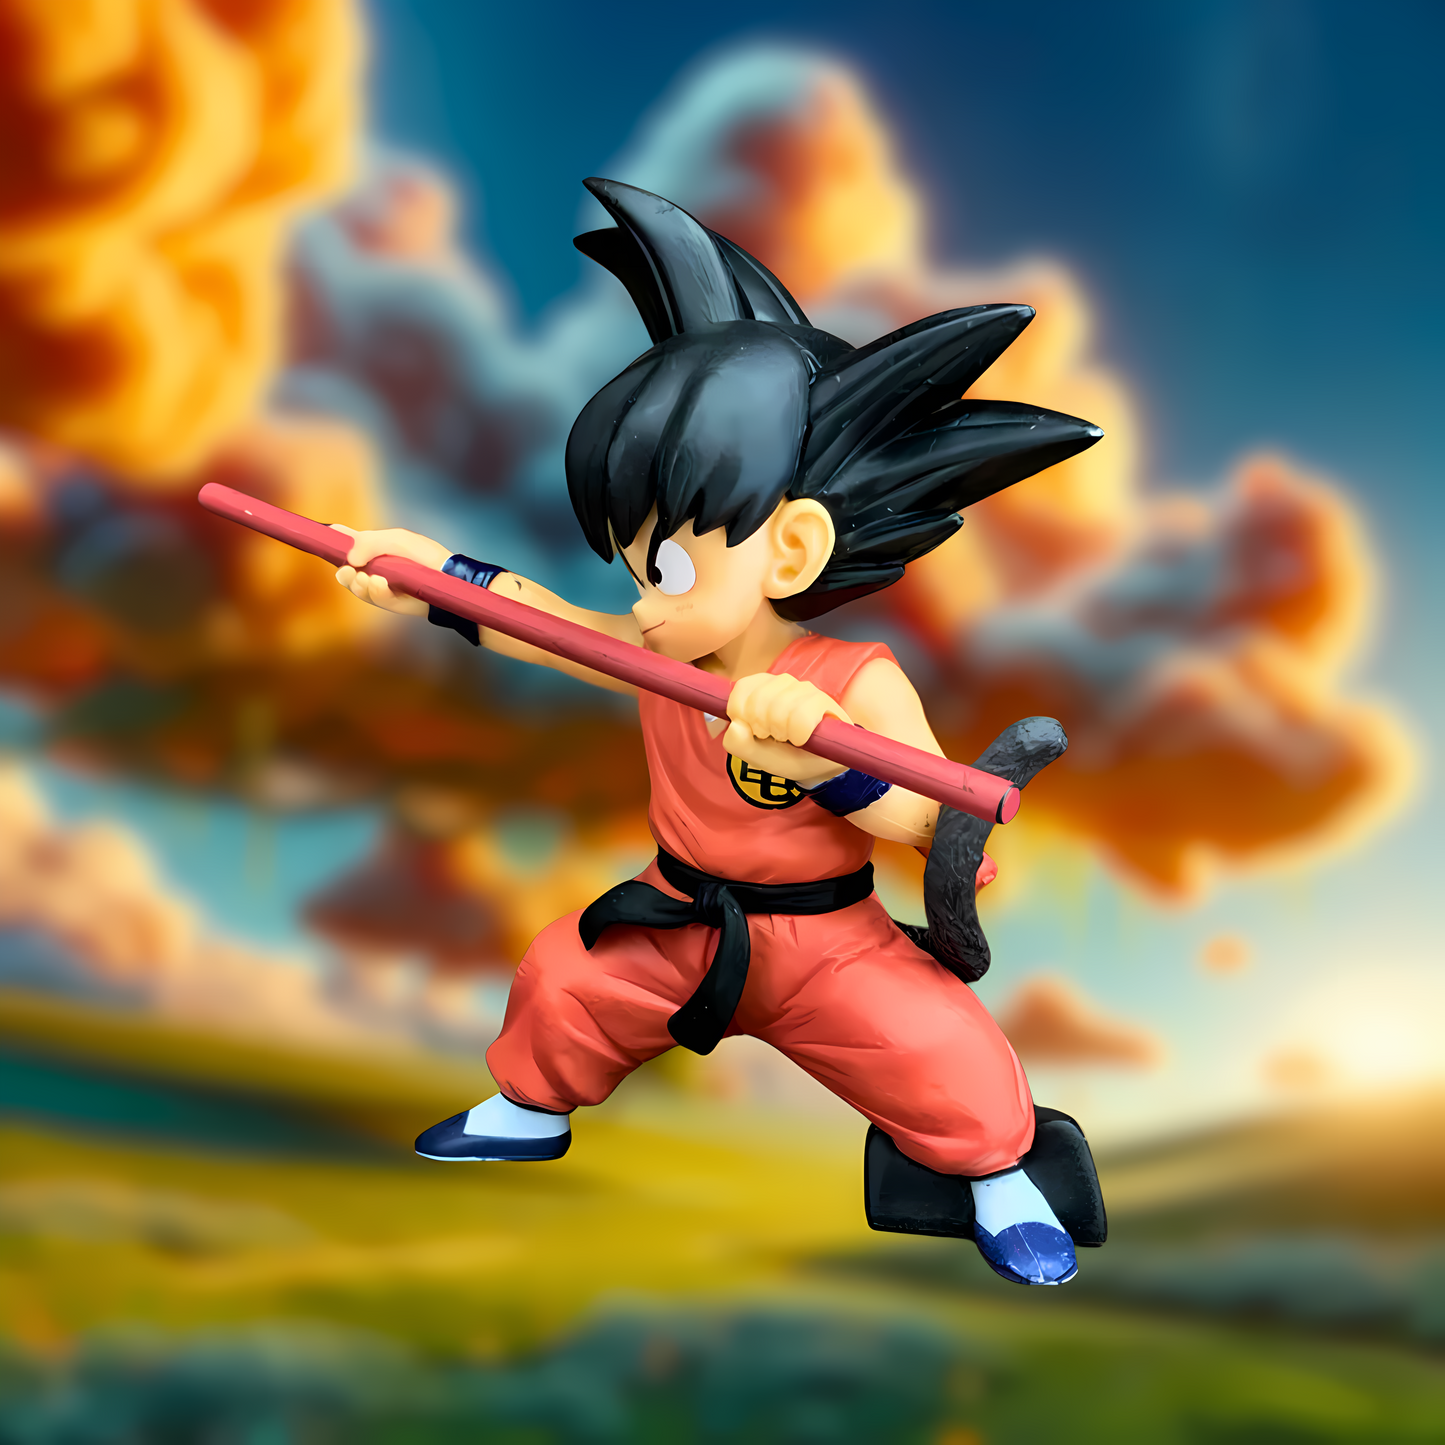 A dynamic pose of the 'Adventures Begin' Goku figure from Dragon Ball, with the iconic Power Pole, capturing the spirit of adventure against a backdrop of flames and clouds.